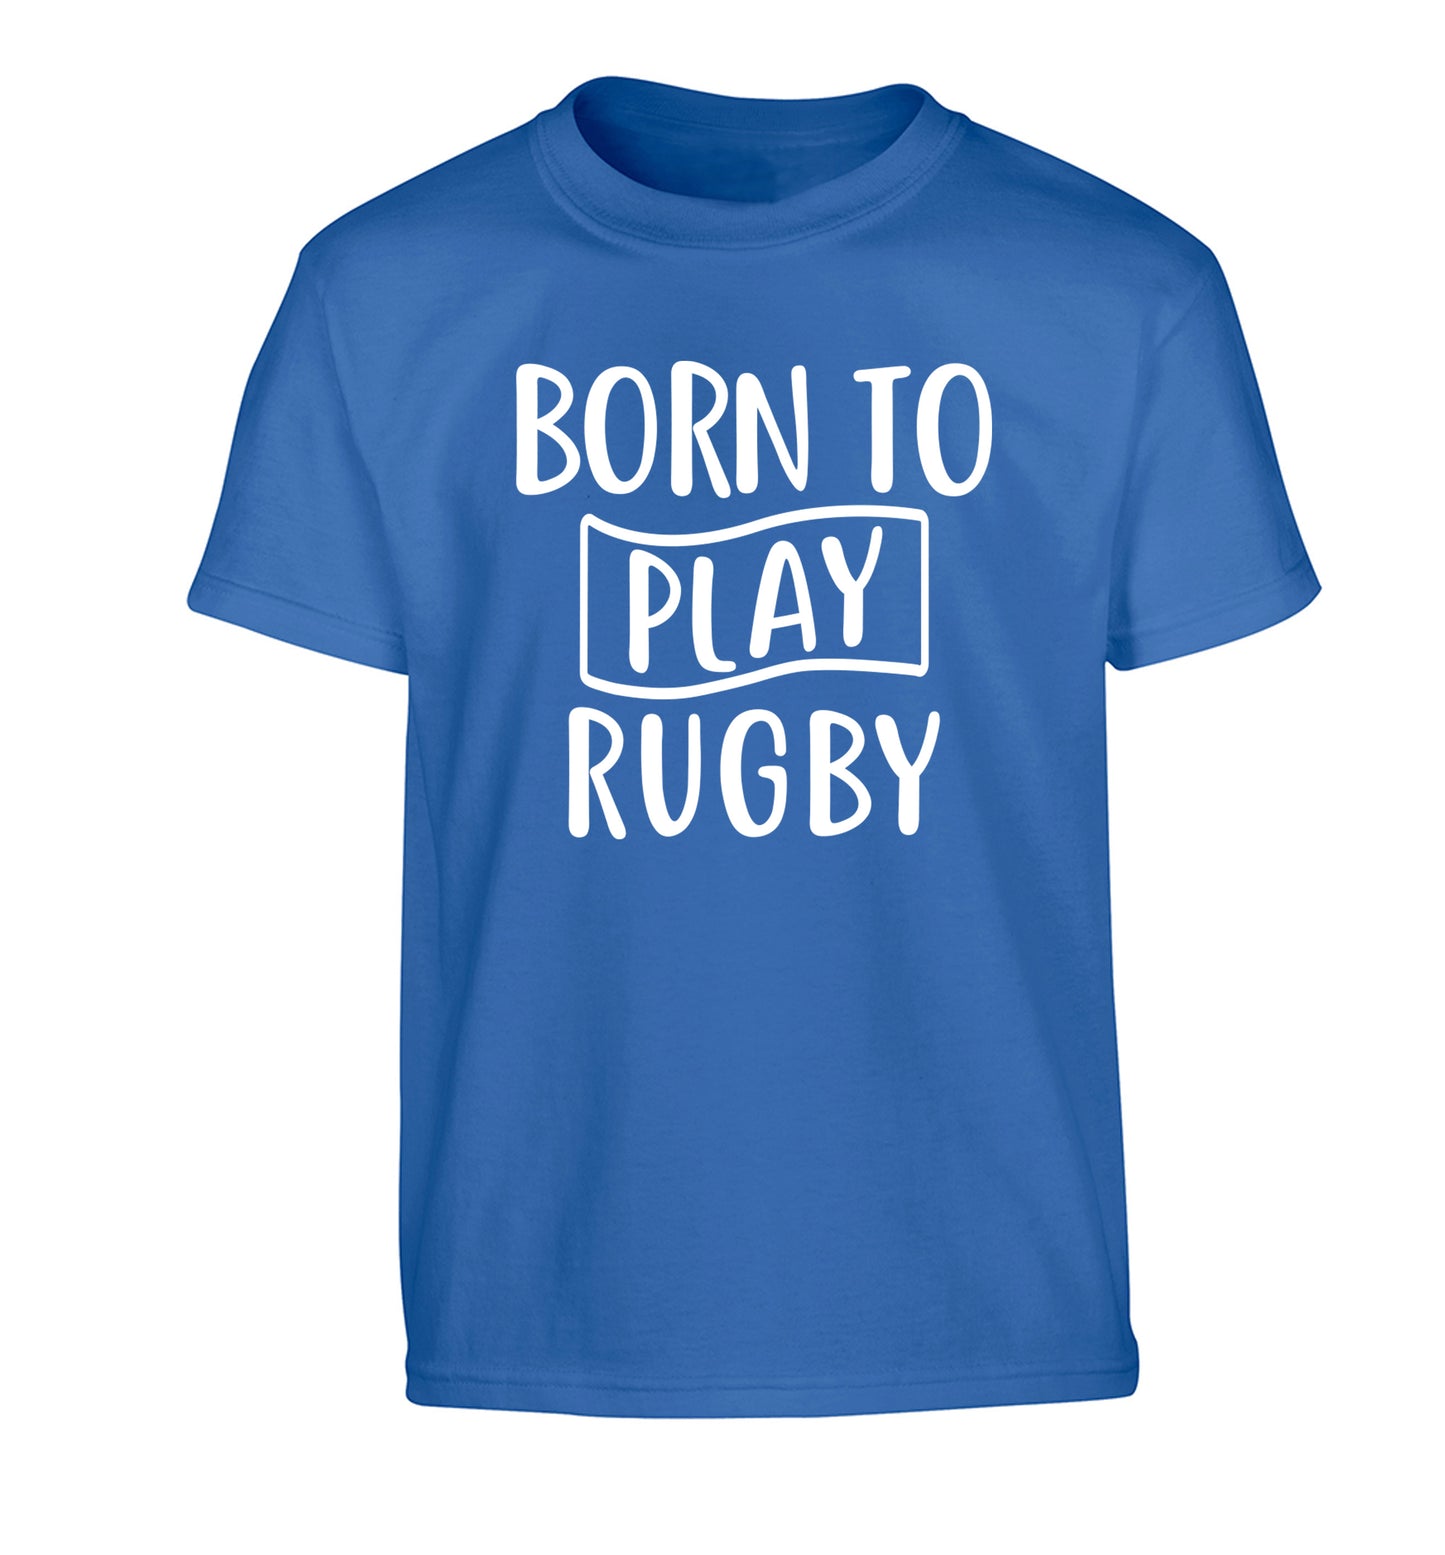 Born to play rugby Children's blue Tshirt 12-13 Years